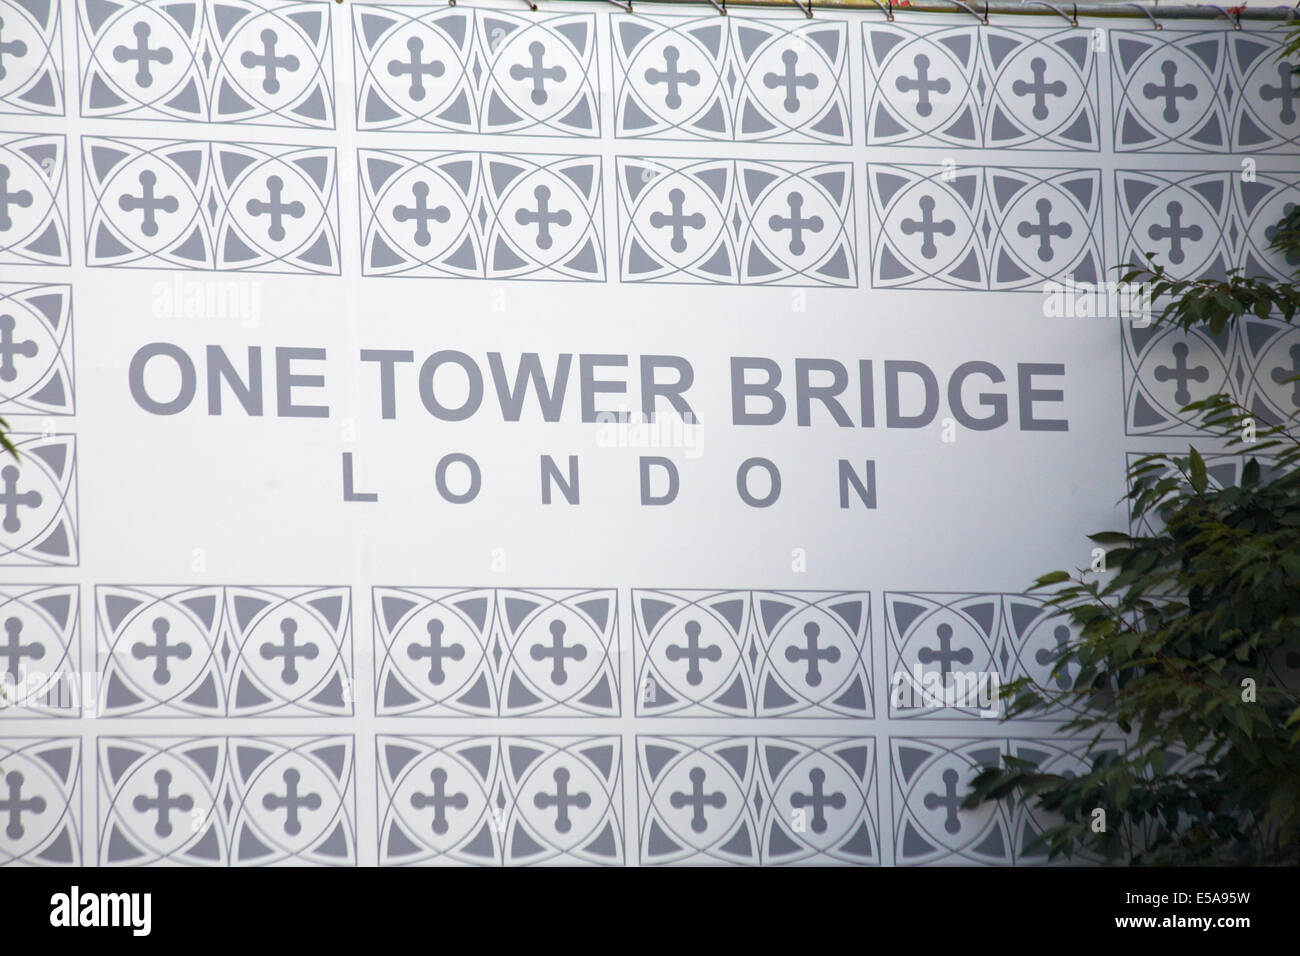 One Tower Bridge London at London in July Stock Photo